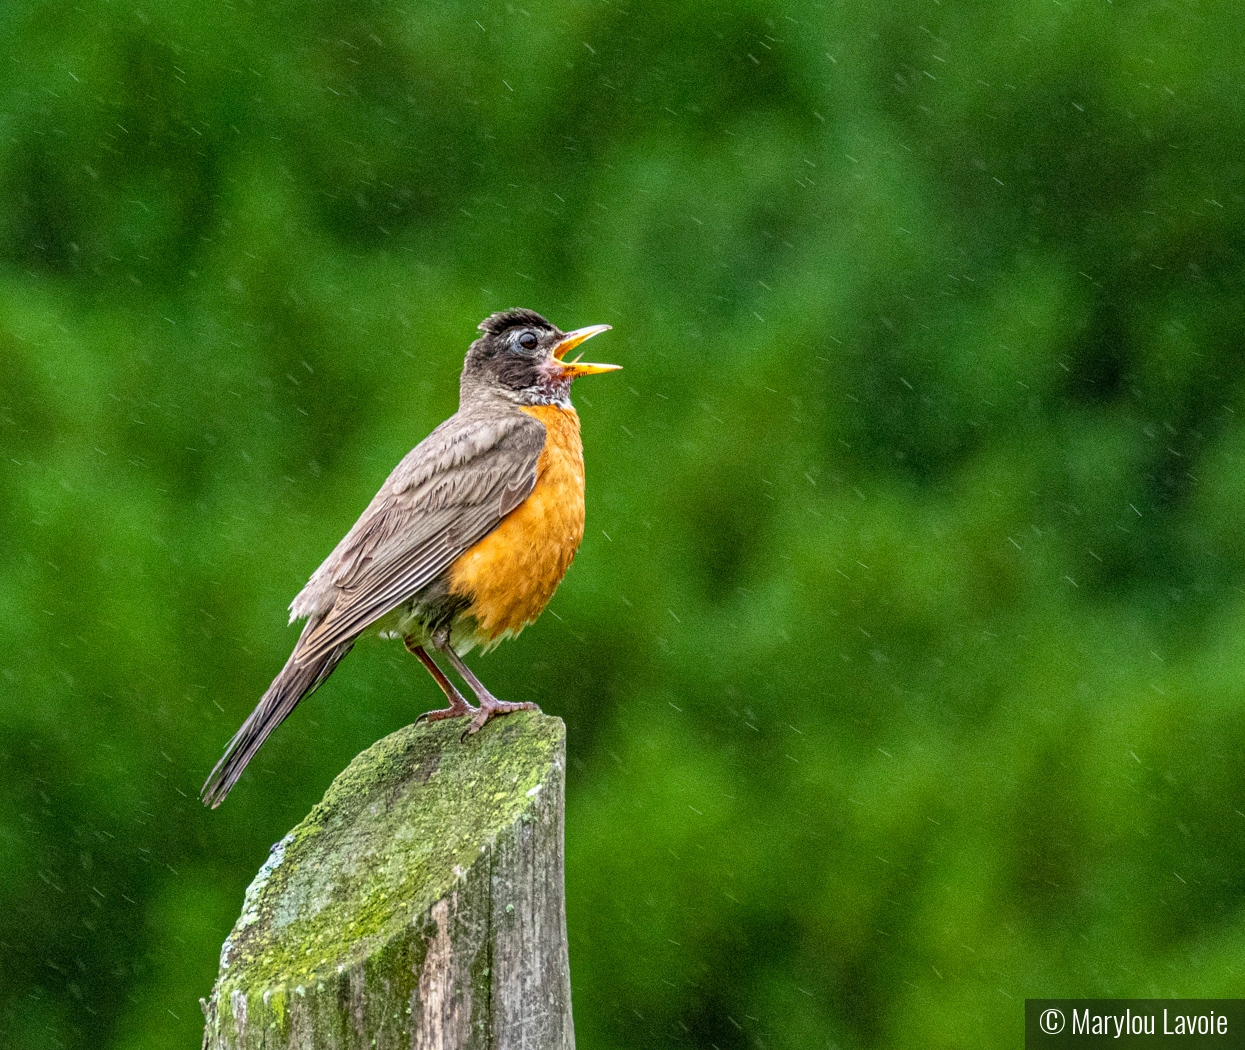 Singing In The Rain by Marylou Lavoie